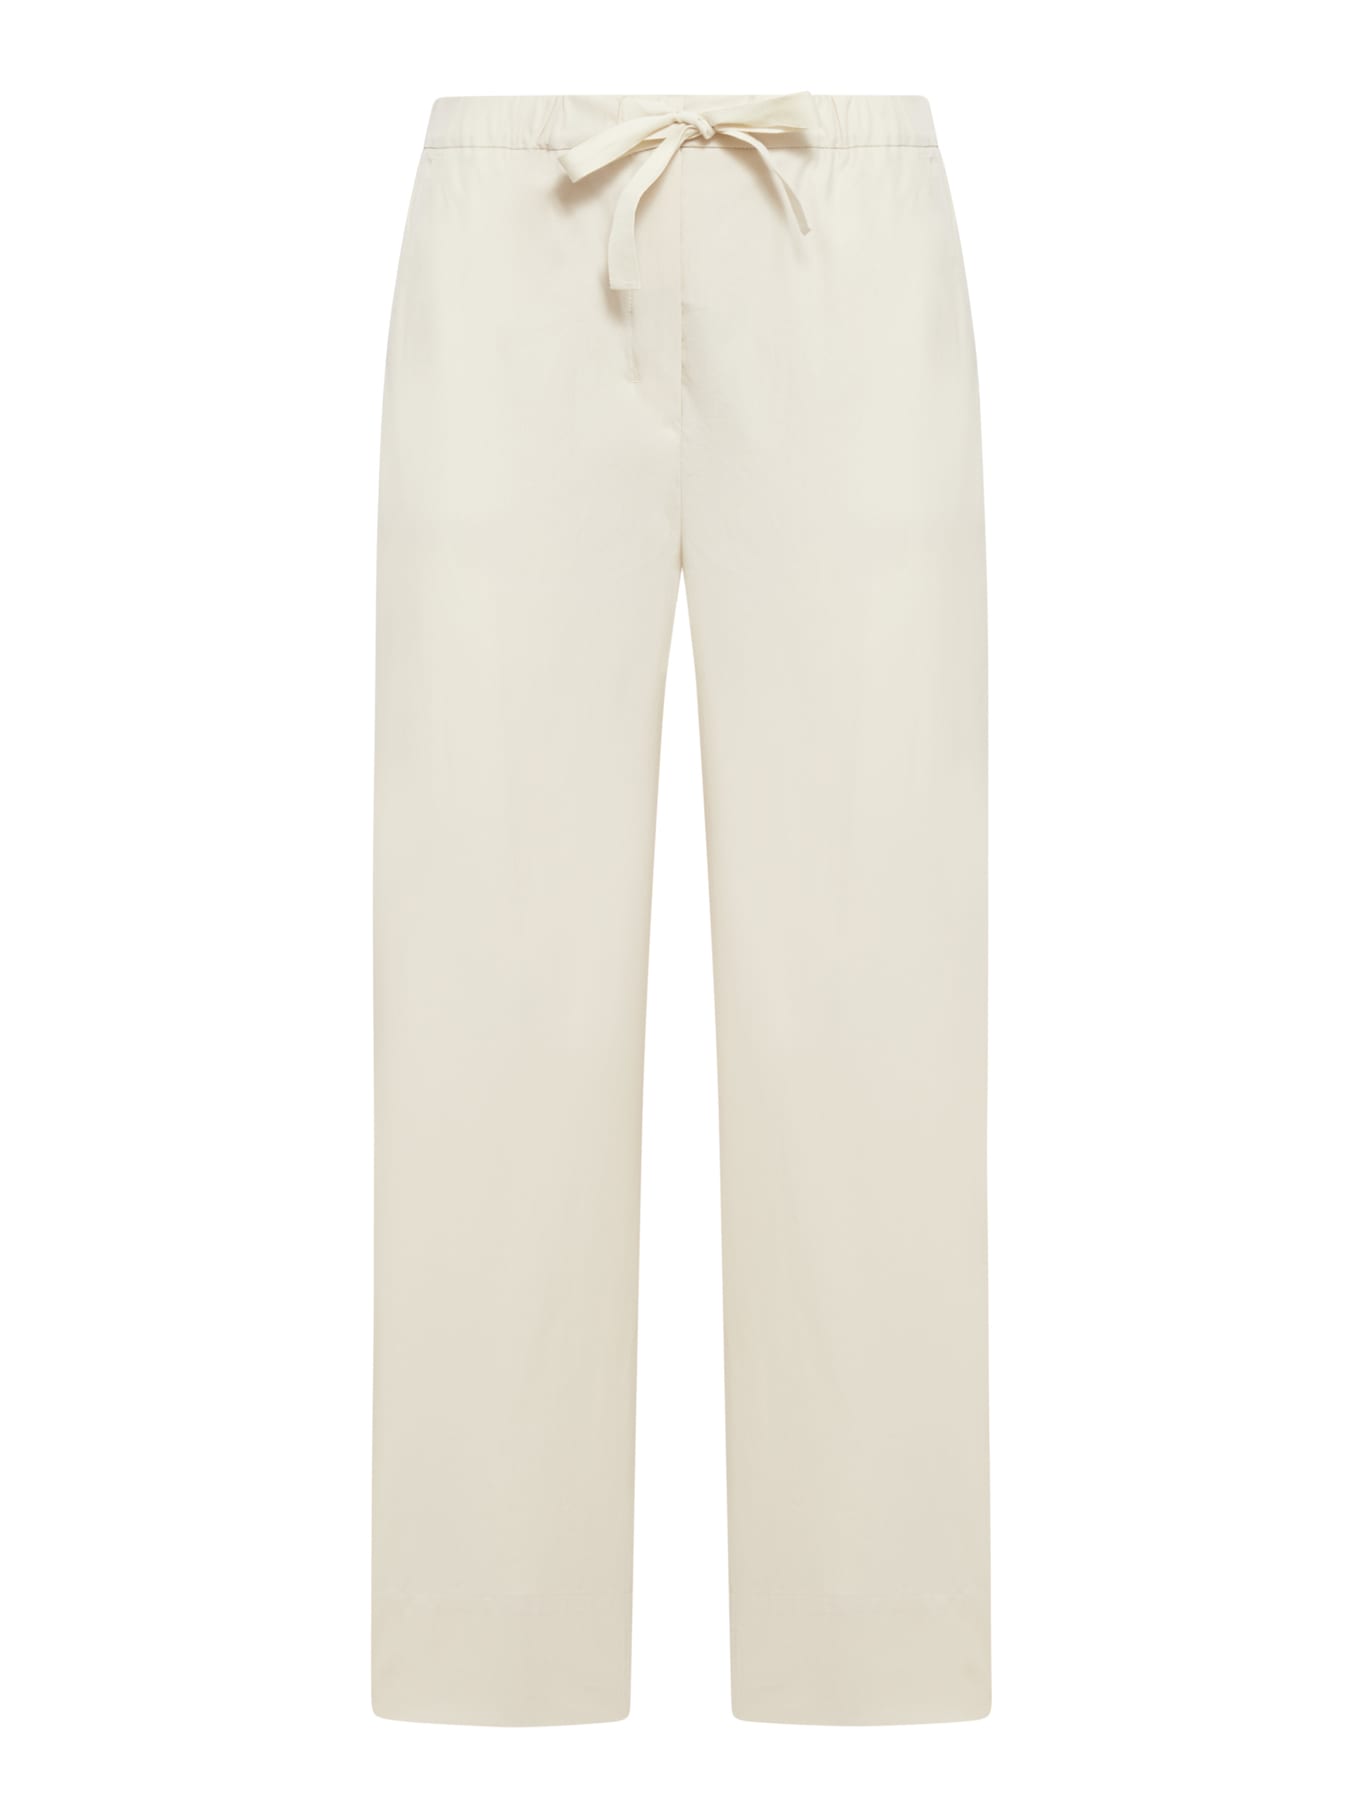 'S Max Mara Laced Trousers